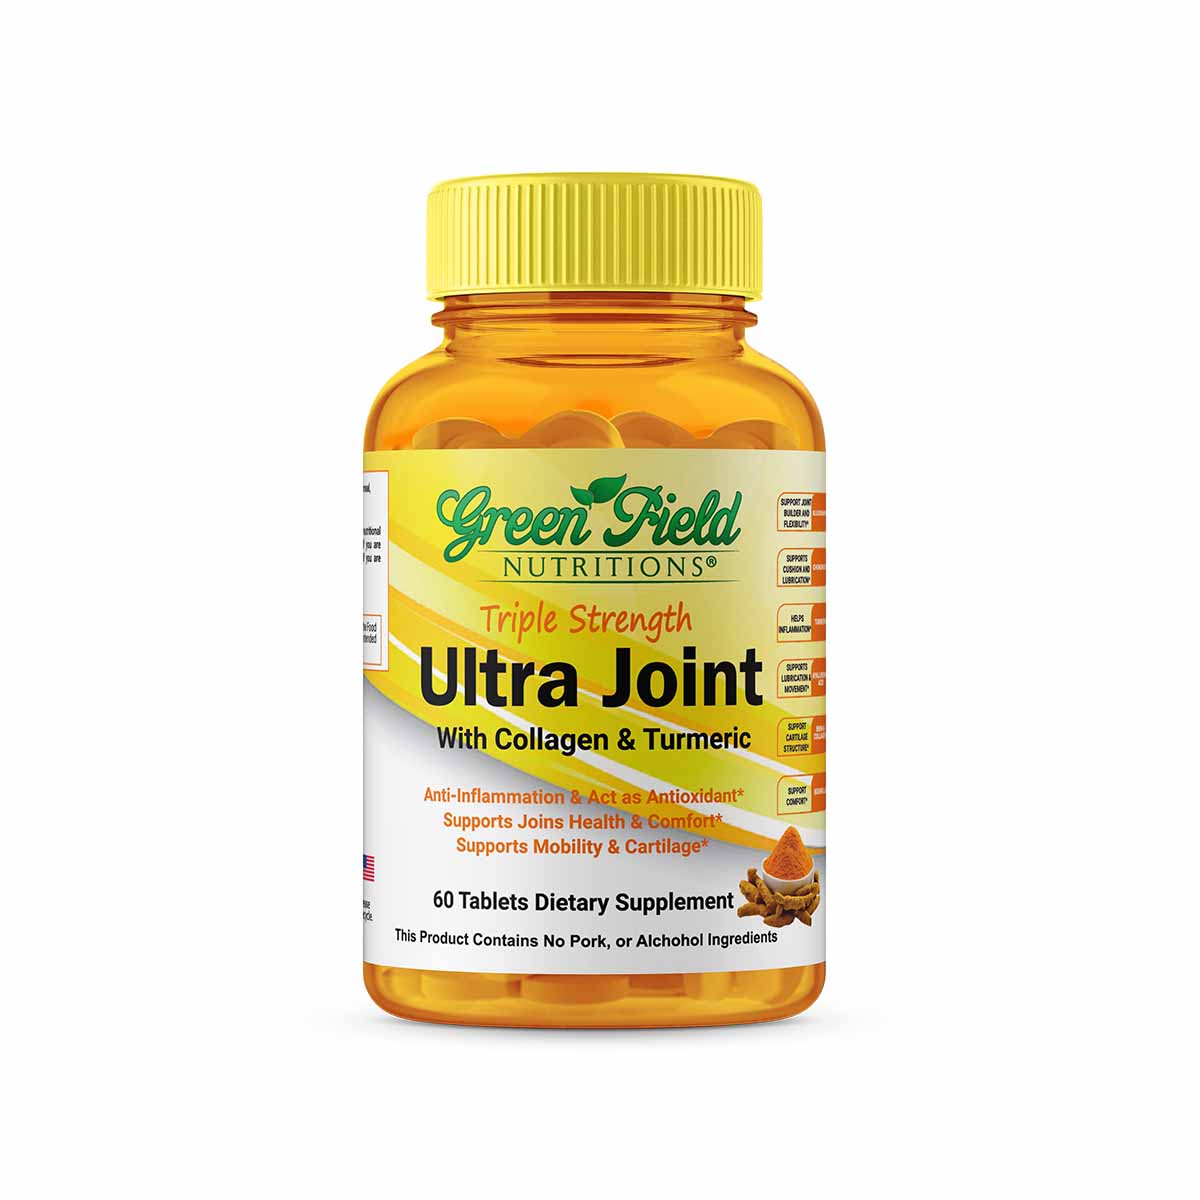 Greenfield Nutritions - Ultra Joint Formula - Halal Glucosamine Chondroitin/MSM with Turmeric for Joint Support